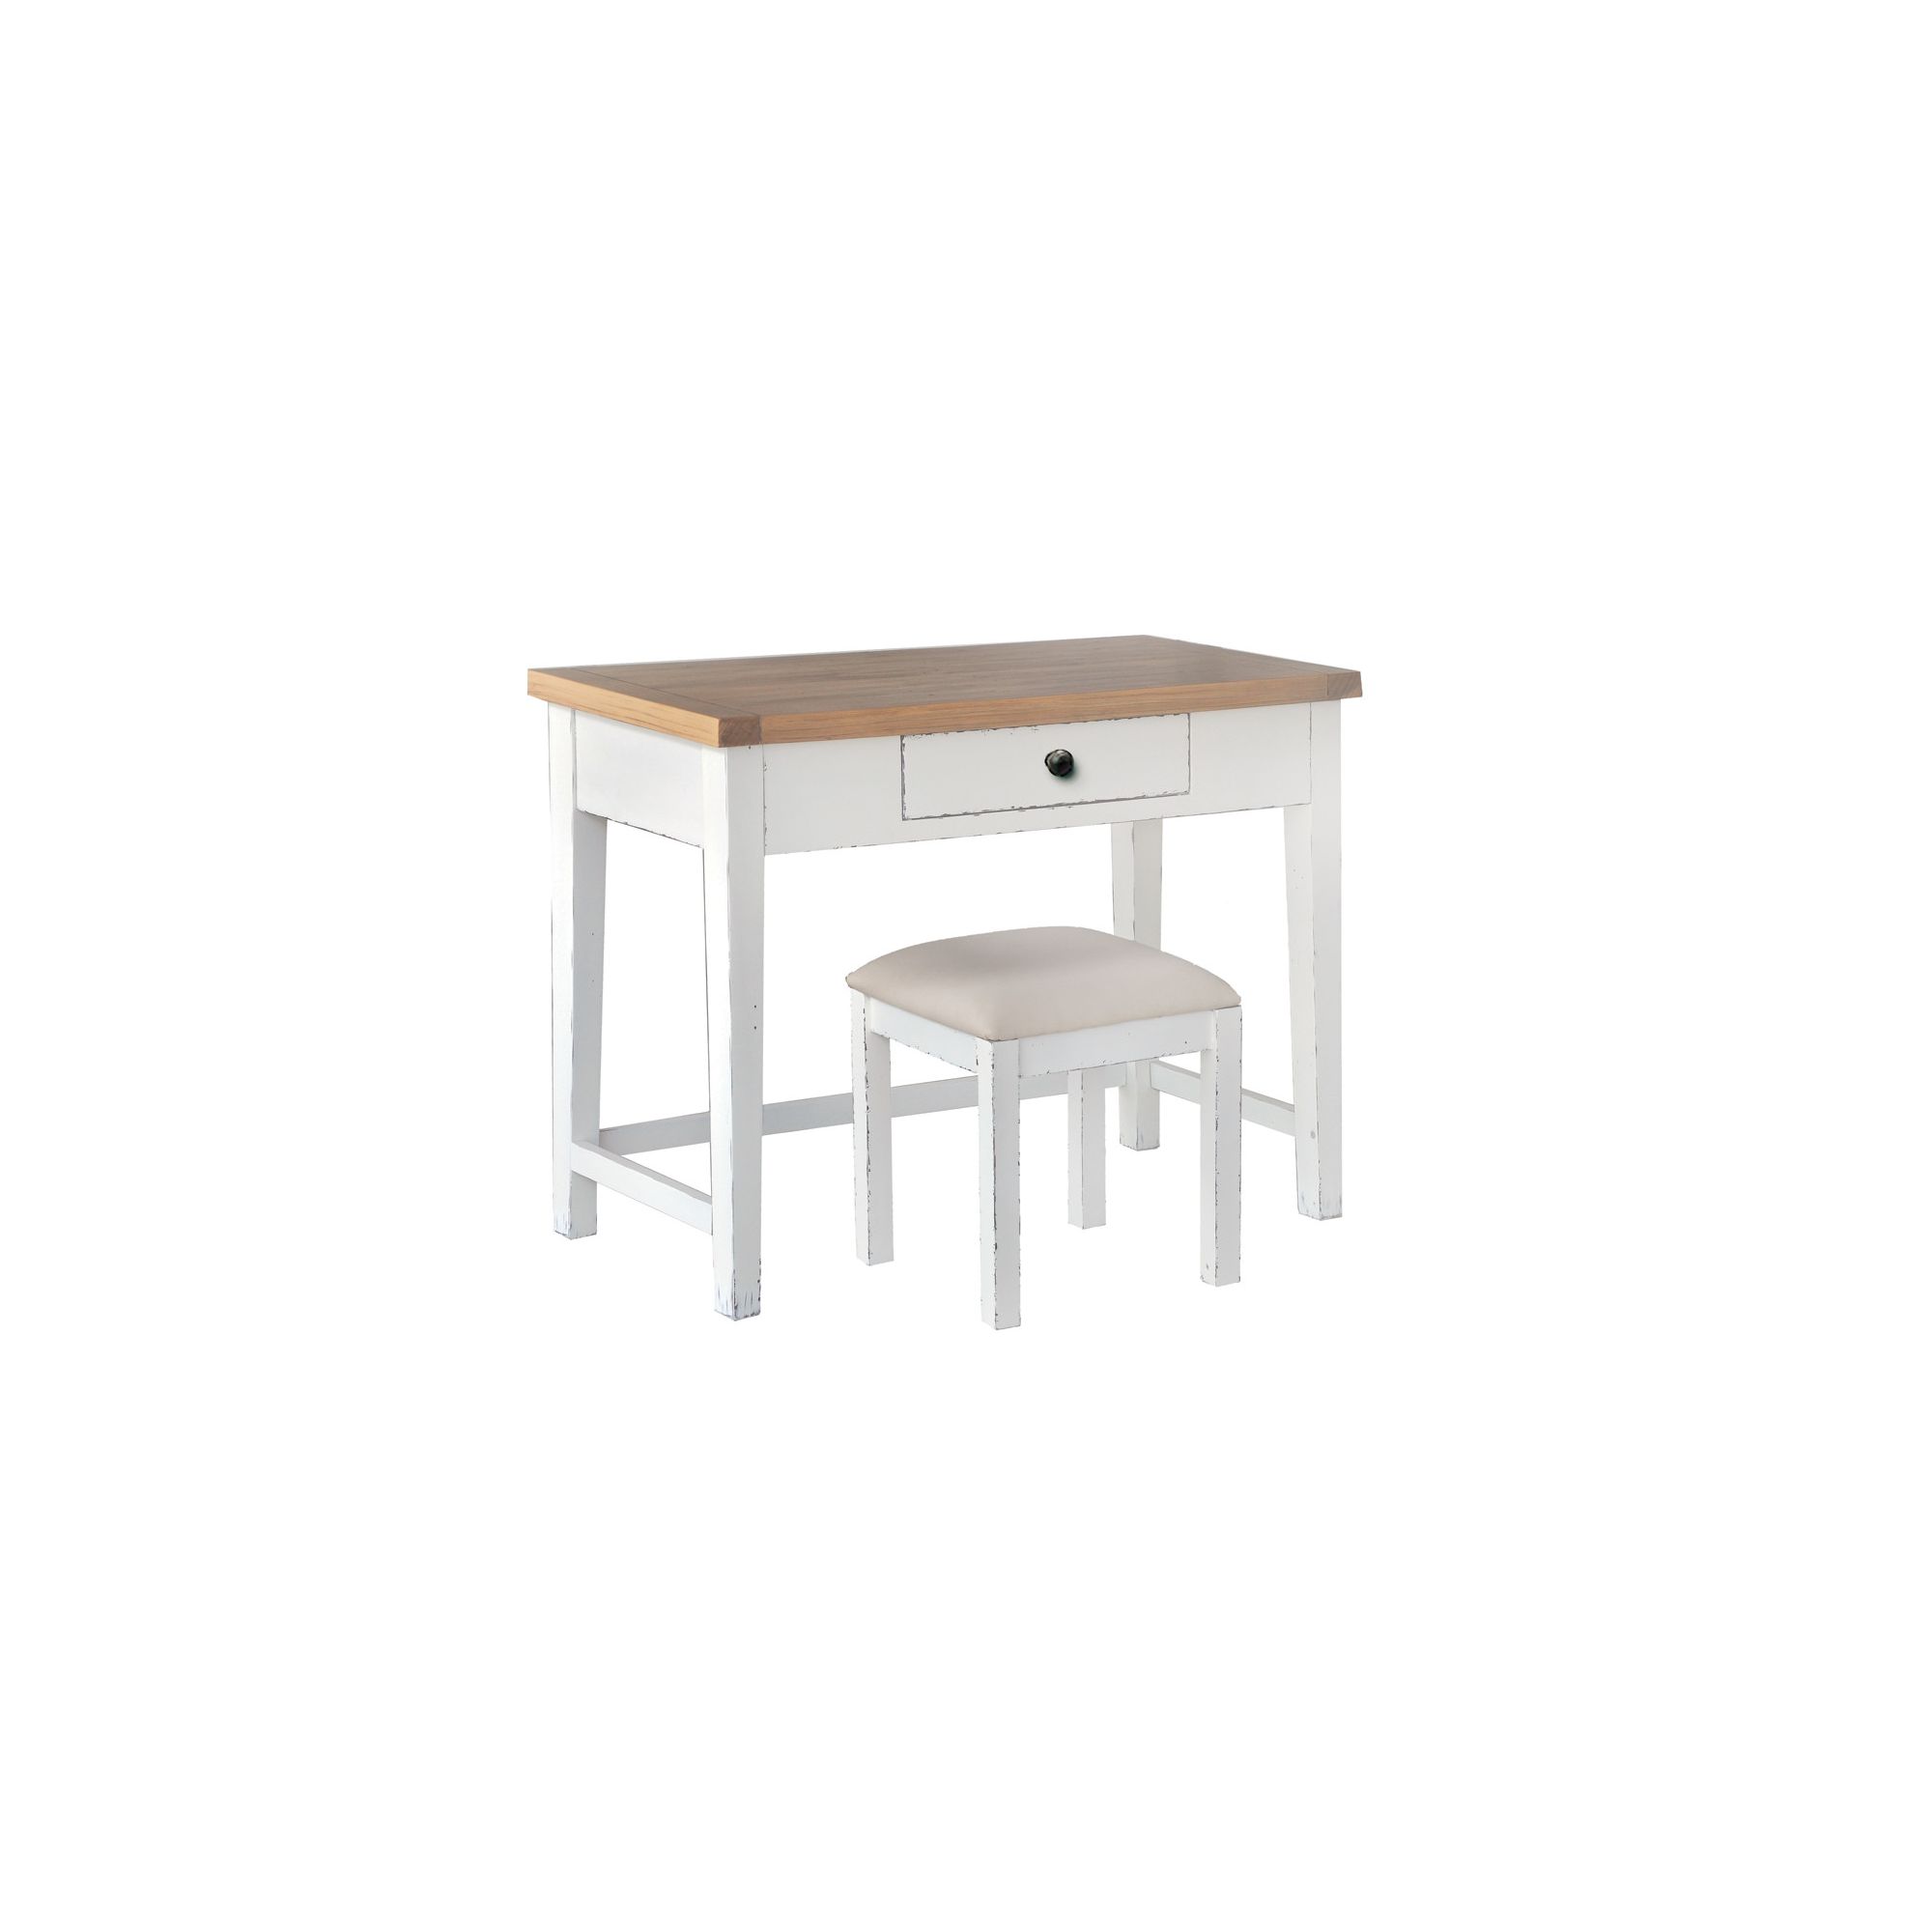 Rowico Essence Dressing Table at Tesco Direct